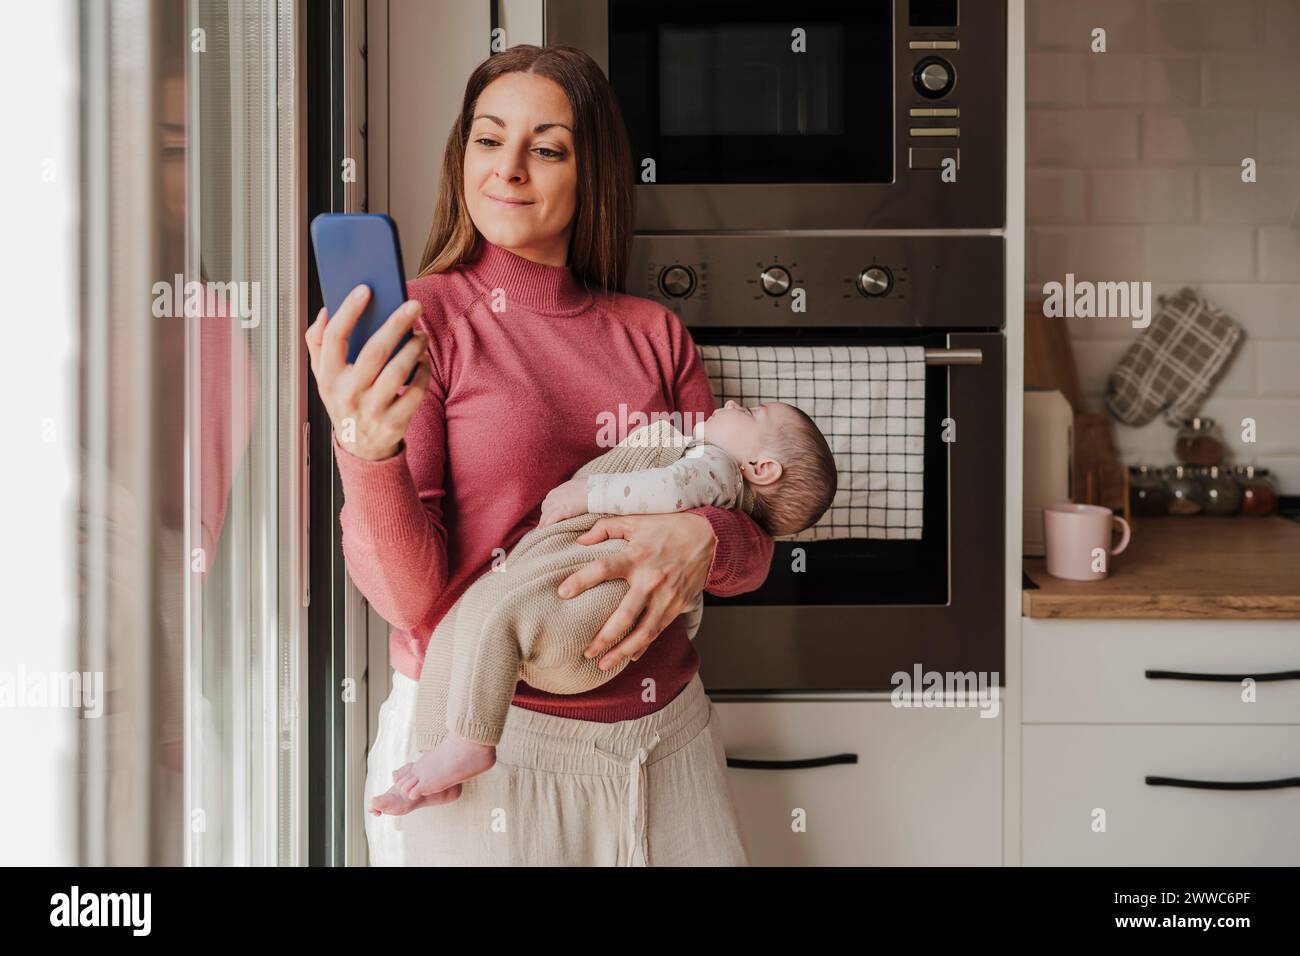 Smiling woman carrying baby girl and using smart phone in kitchen Stock Photo